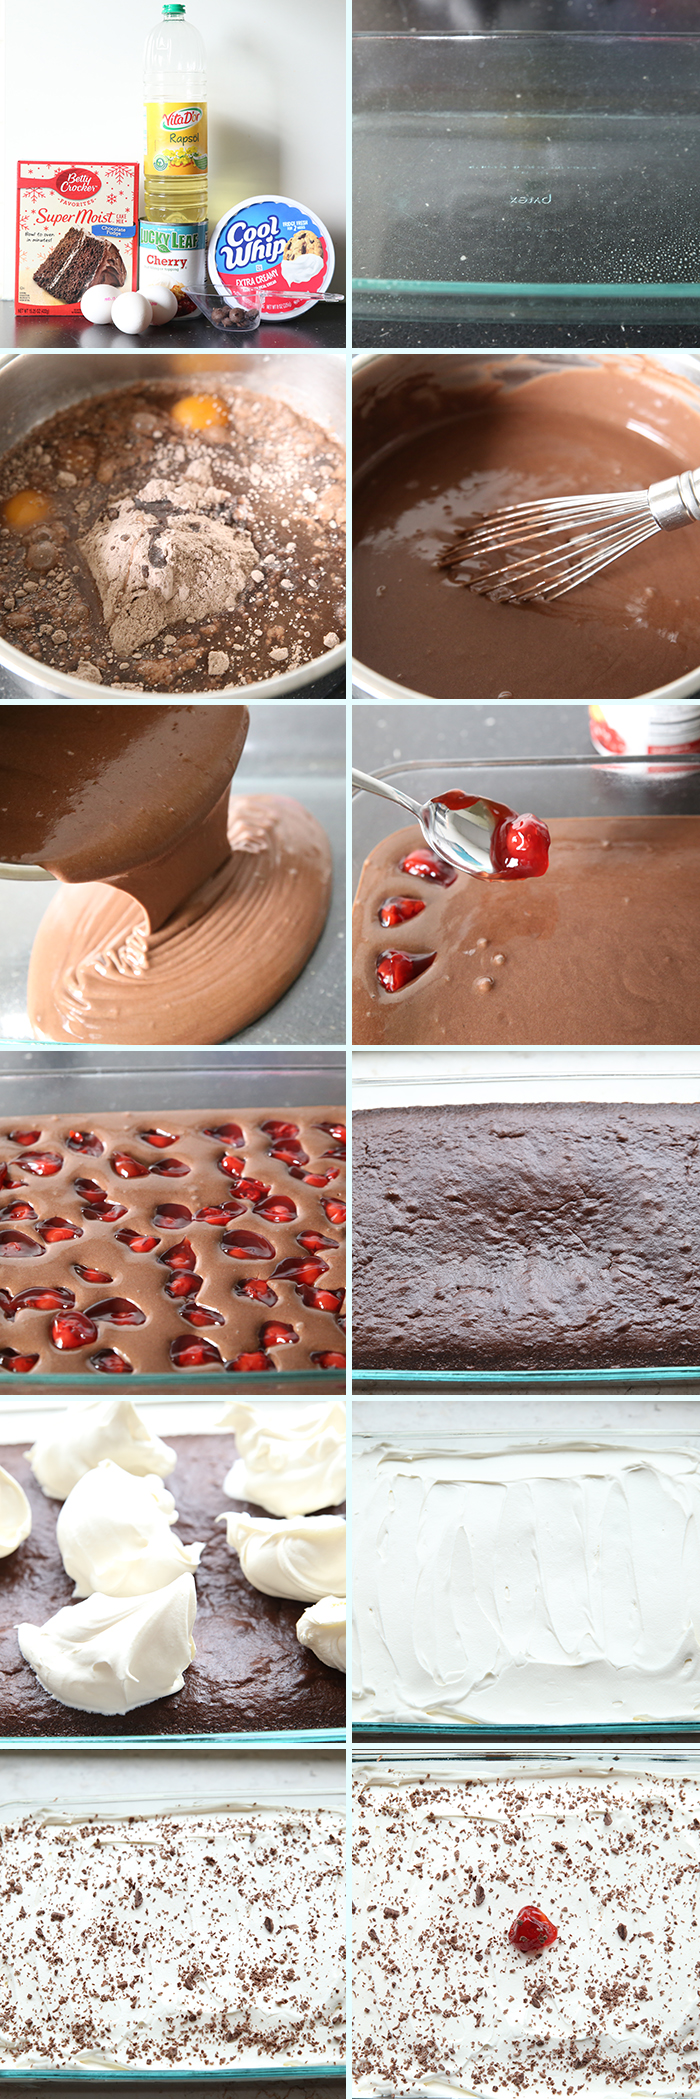 12-photo picture collage of how to make Easy Black Forest Cake.